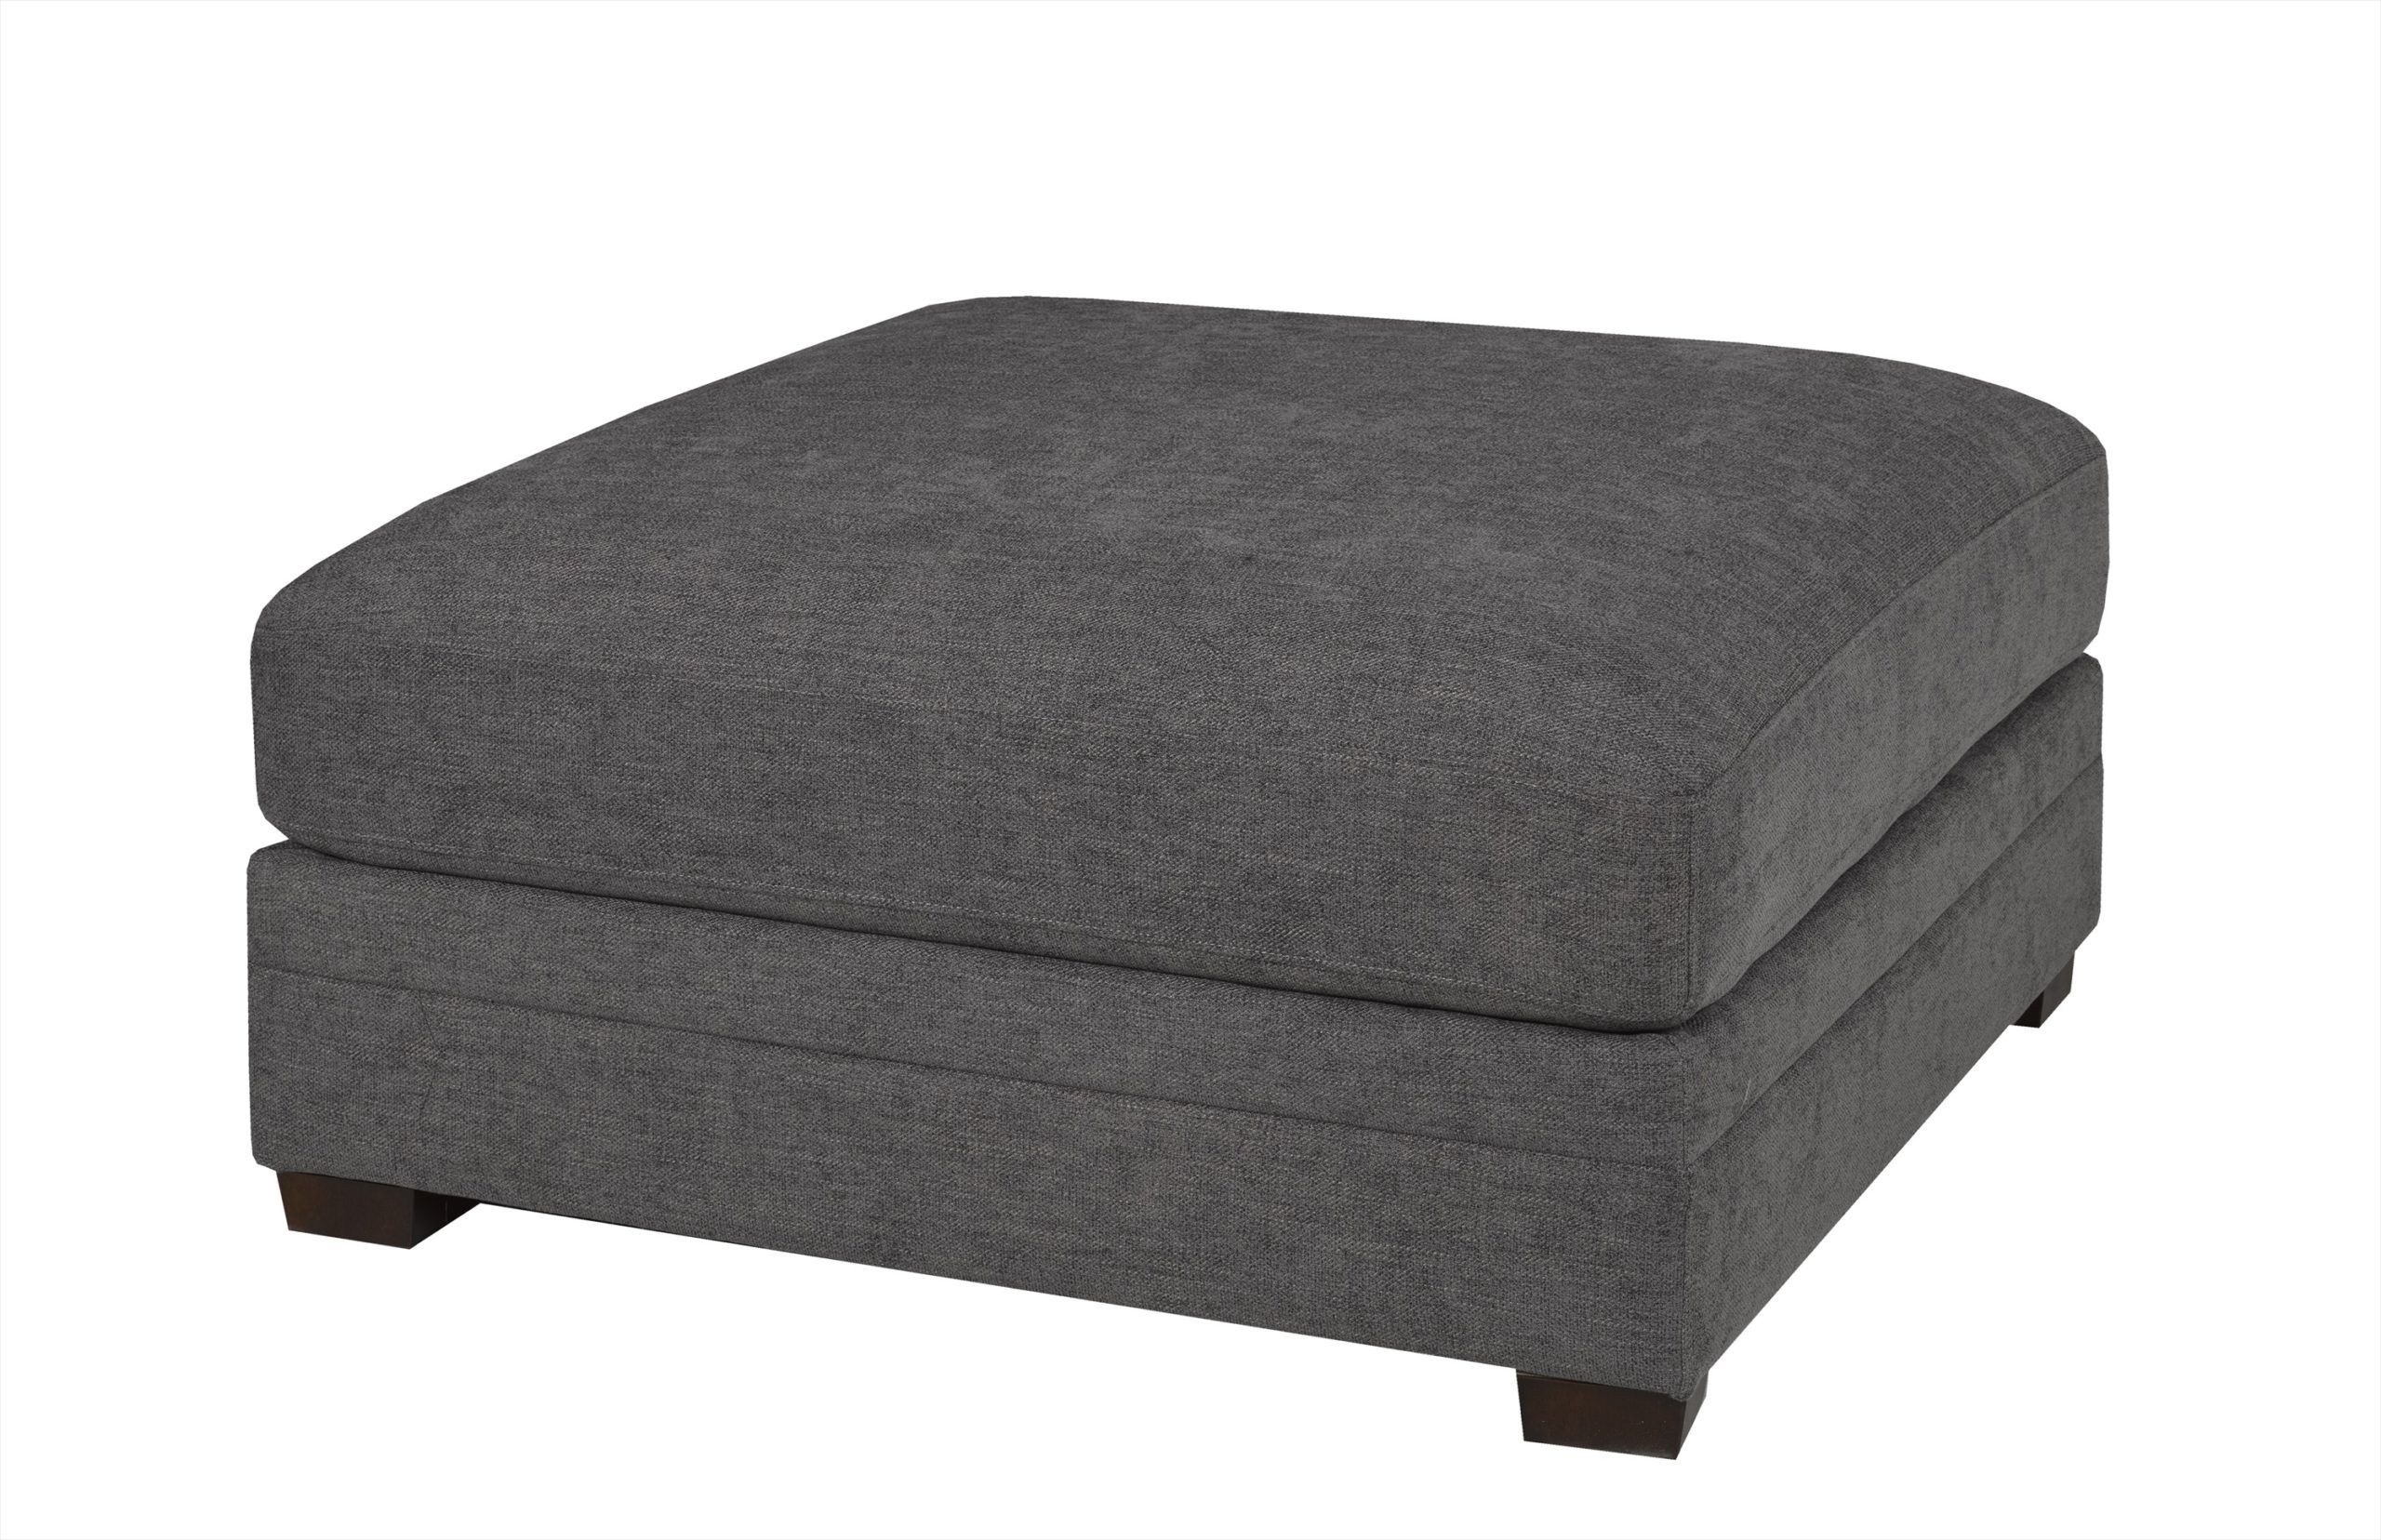 Contemporary Charcoal Grey Ottoman | Arrow Furniture Pertaining To Charcoal And Light Gray Cotton Pouf Ottomans (View 1 of 20)